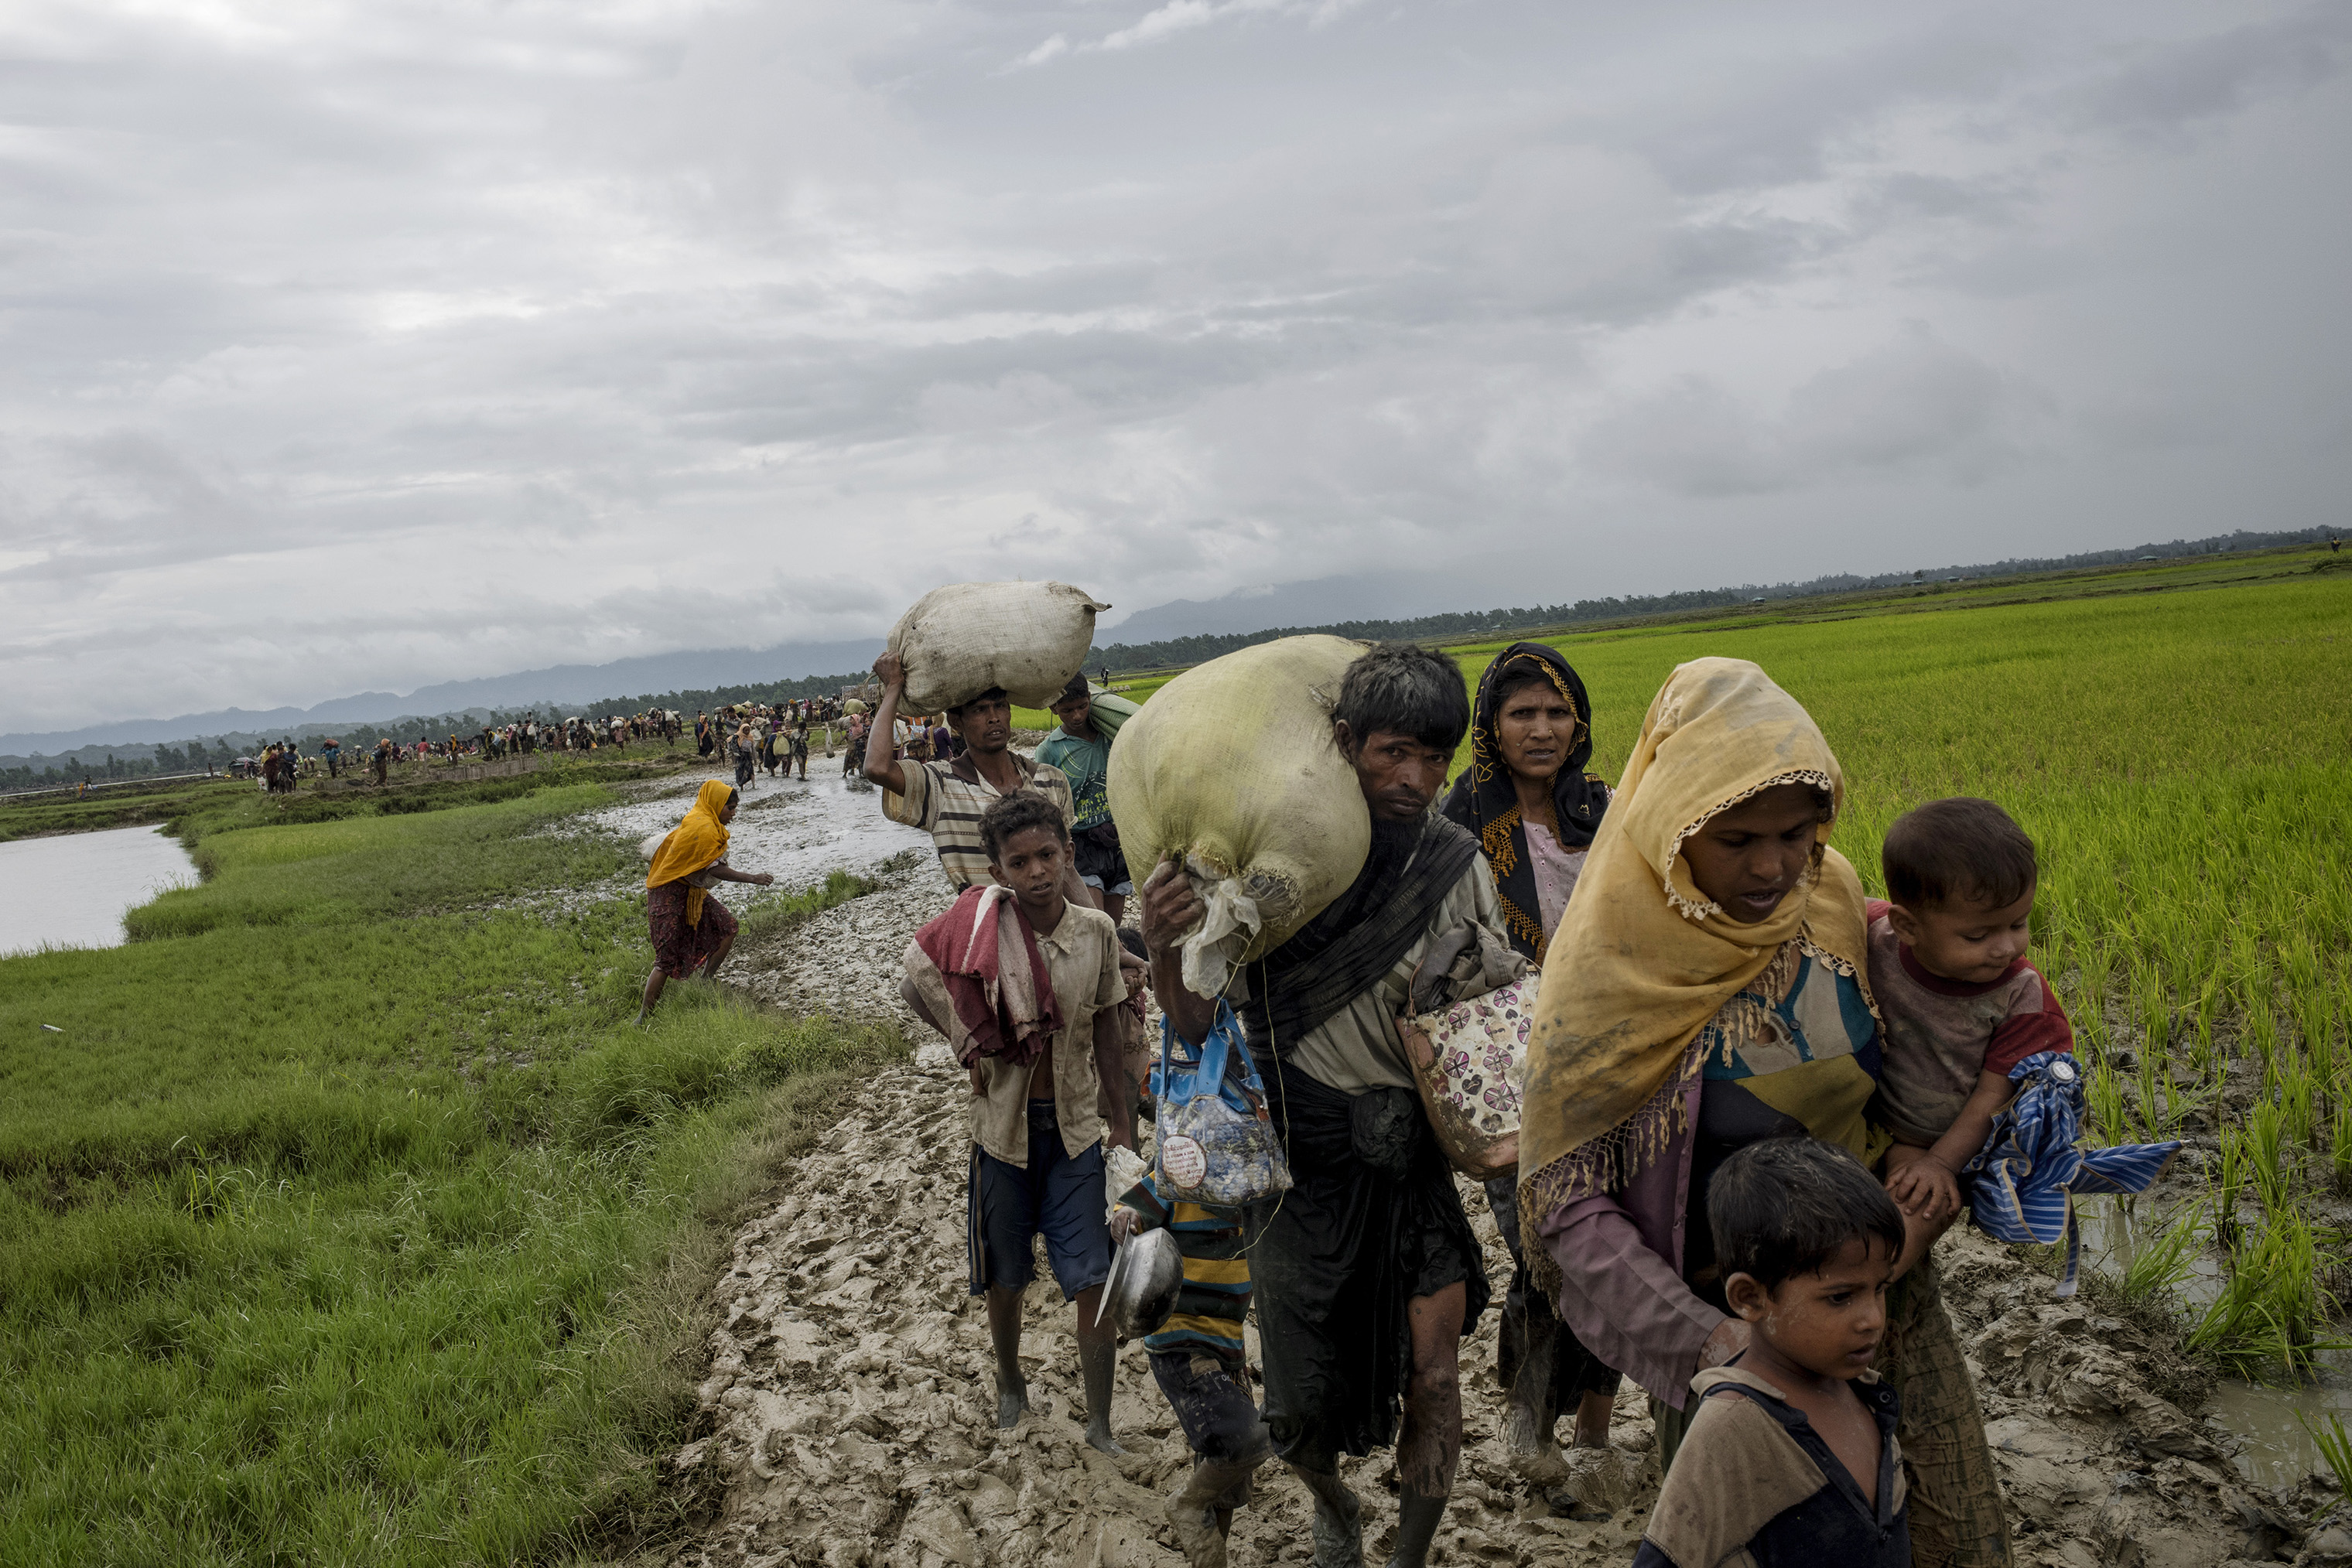 Members of Myanmar's Rohingya ethnic minority walk through paddy fields and flooded land after crossing the border into Bangladesh, August 31, 2017.